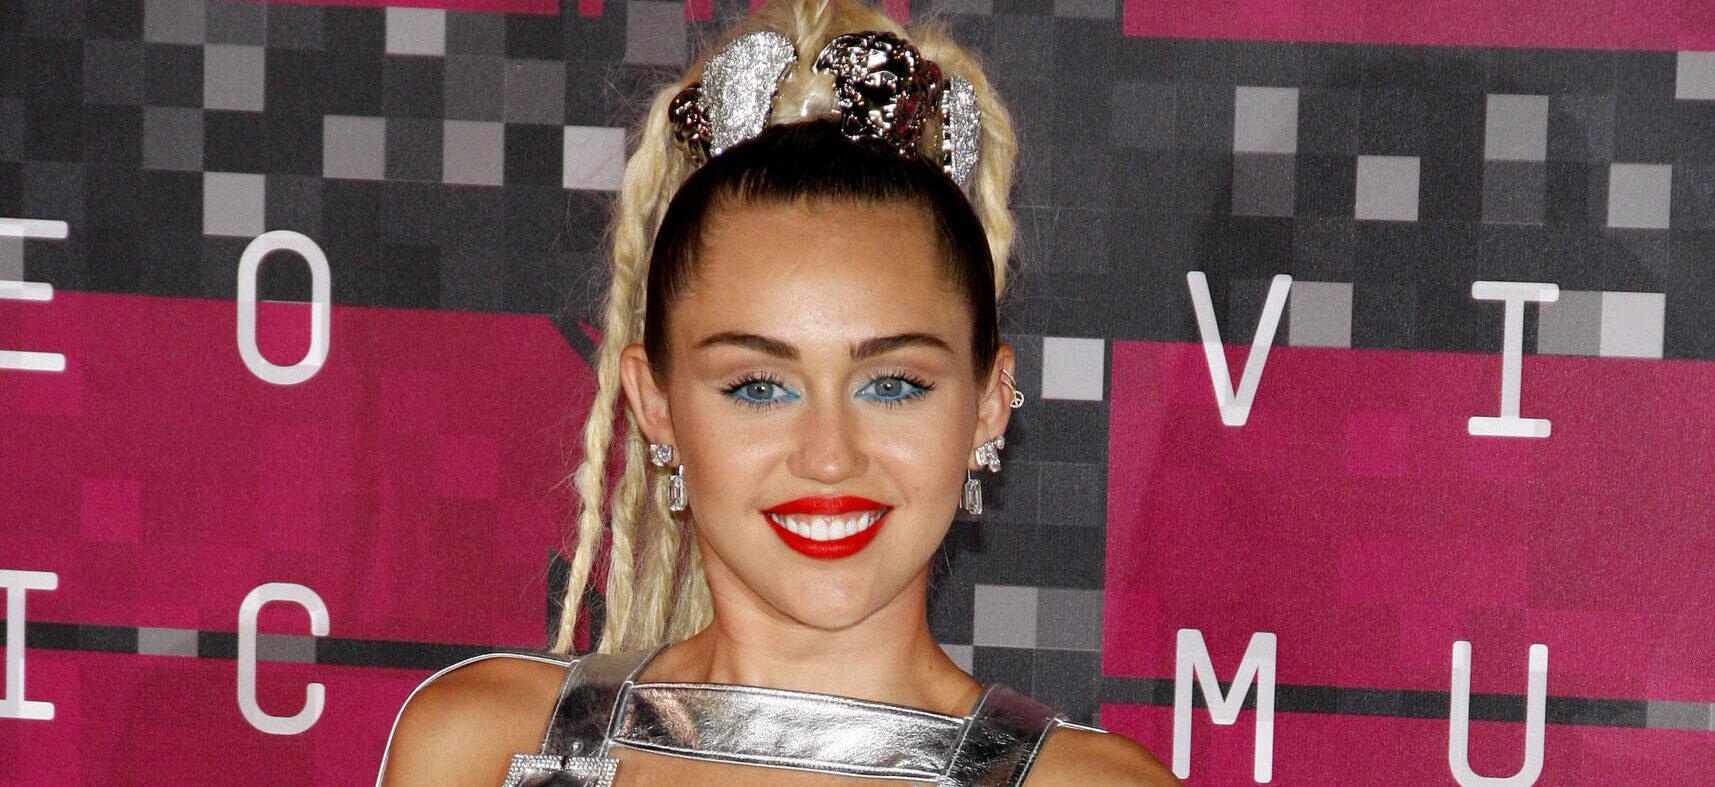 Fans Praise Miley Cyrus’ ‘Maturity’ As She Talks Relationship With Ex Liam Hemsworth